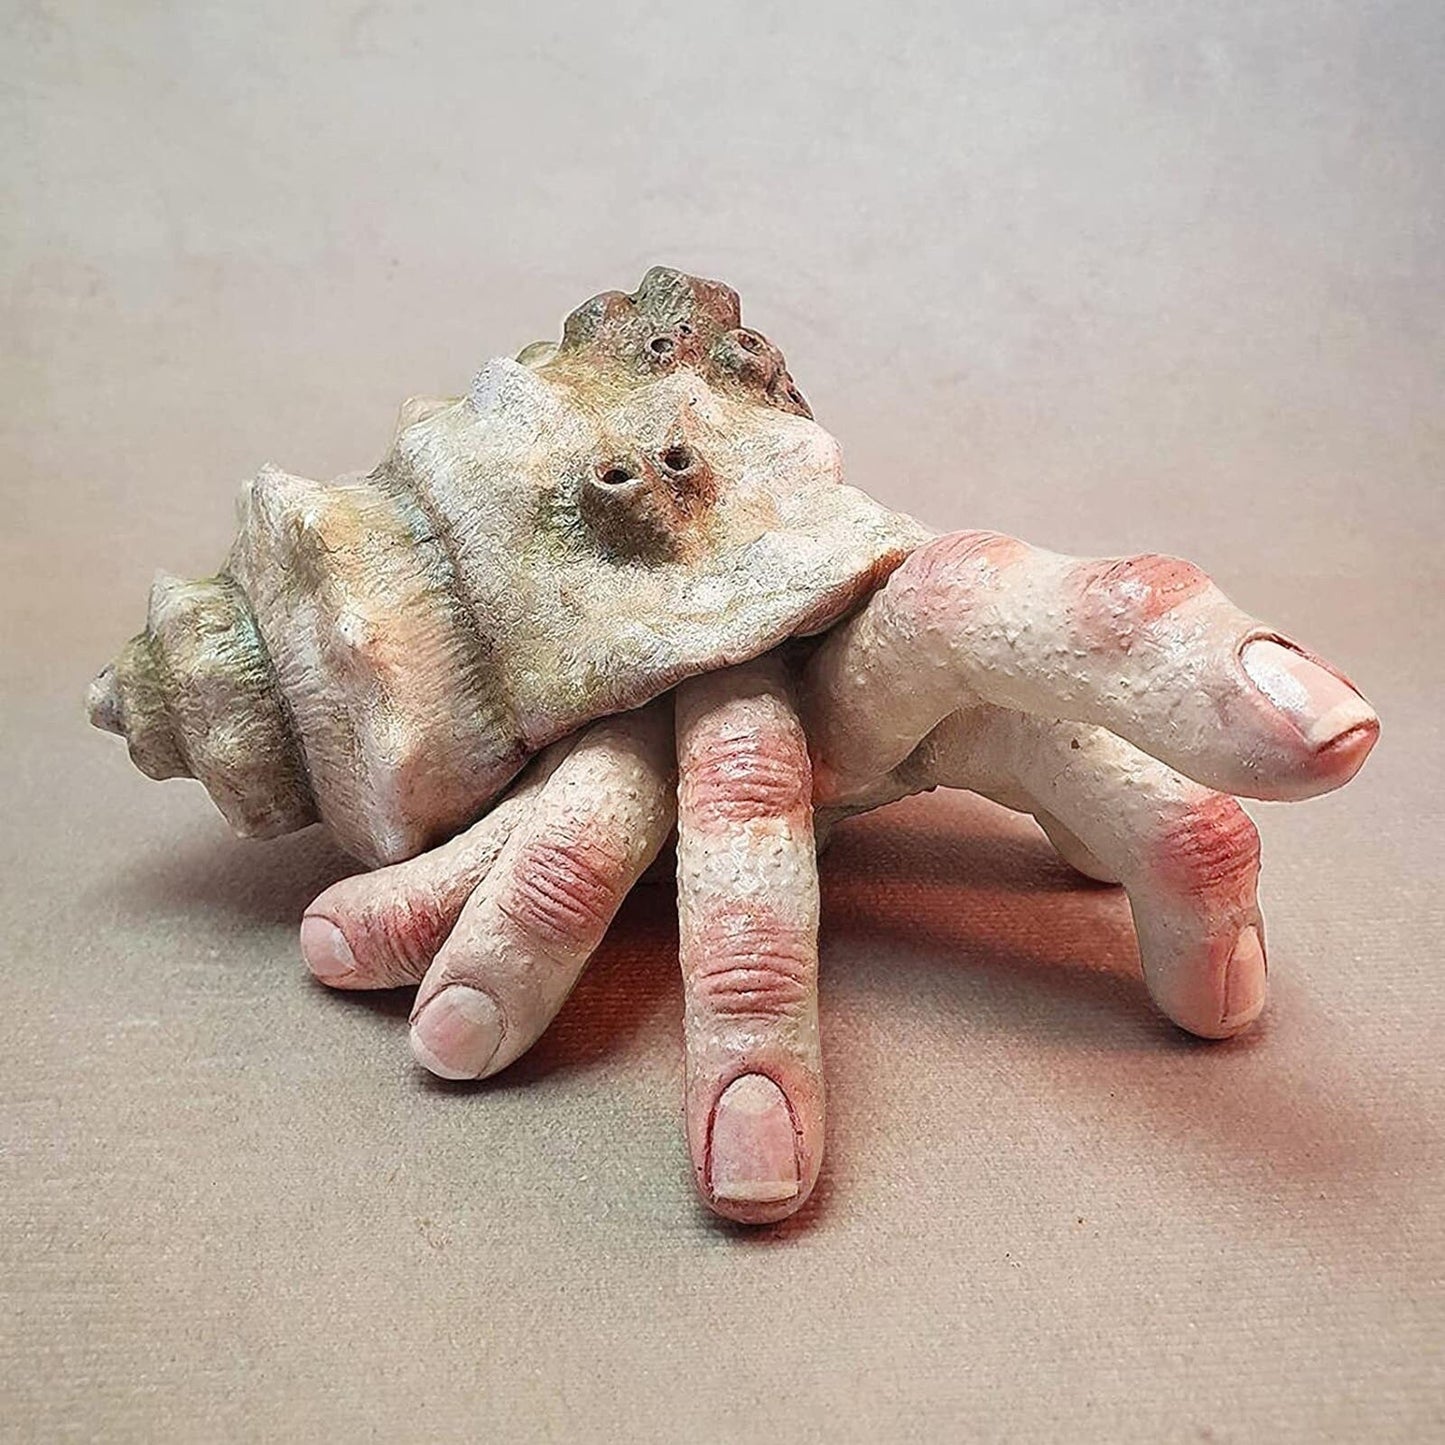 A creepy finger crab sculpture which looks like a hermit crab except human fingers are coming out of the shell instead of a crab.